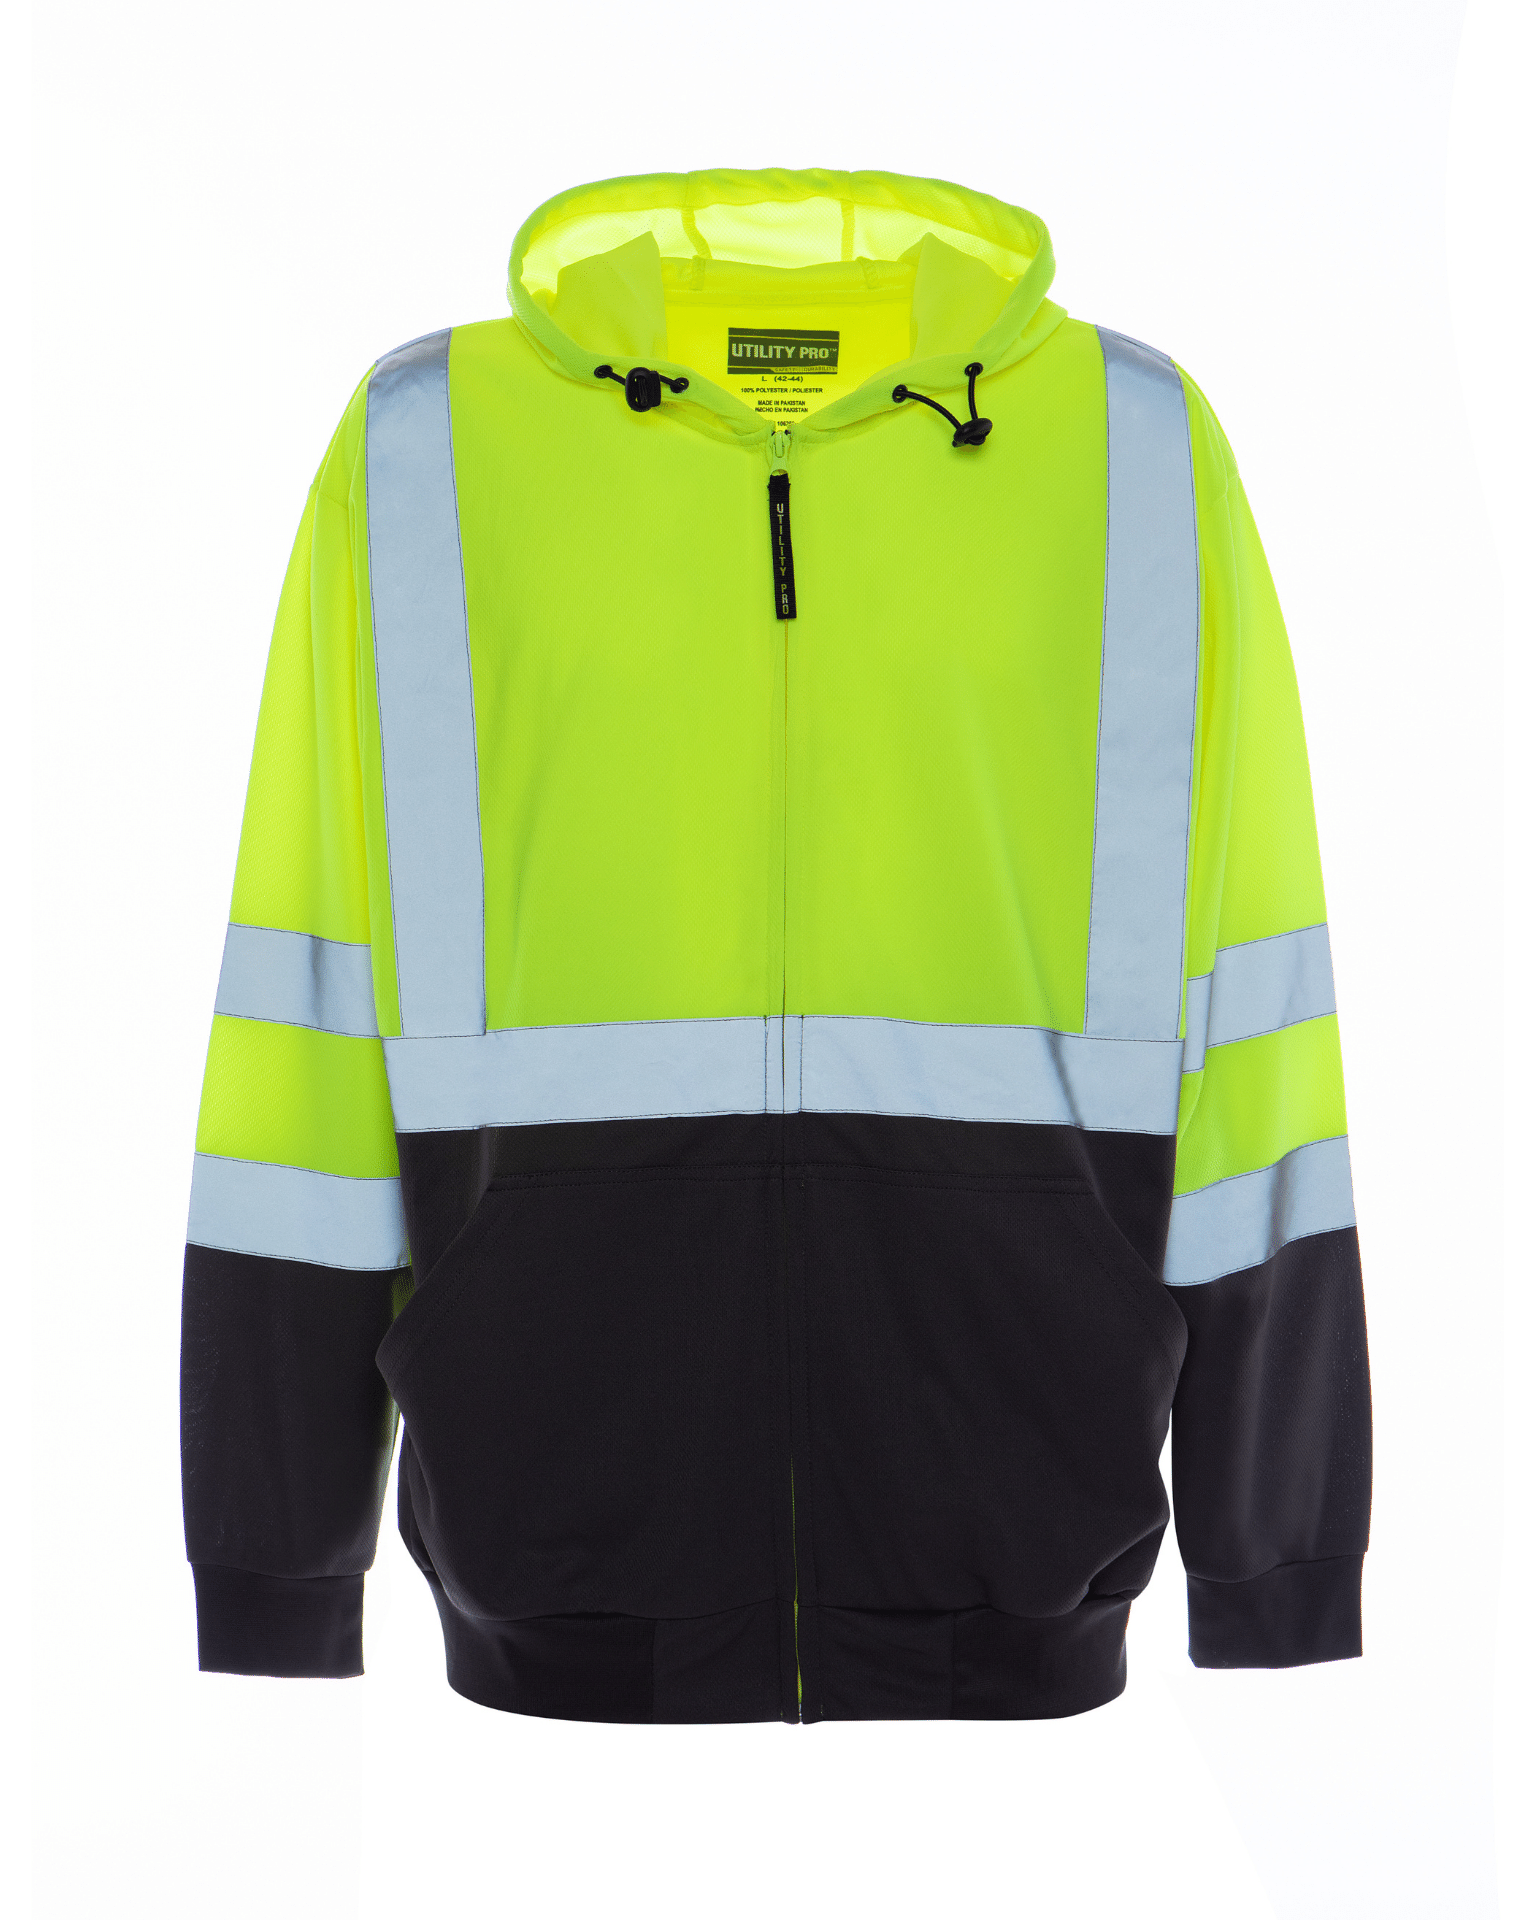 ANSI Class 3 High Visibility ultra light birdseye fabric liquid nd stain repellent full zip hoodie by Utility Pro